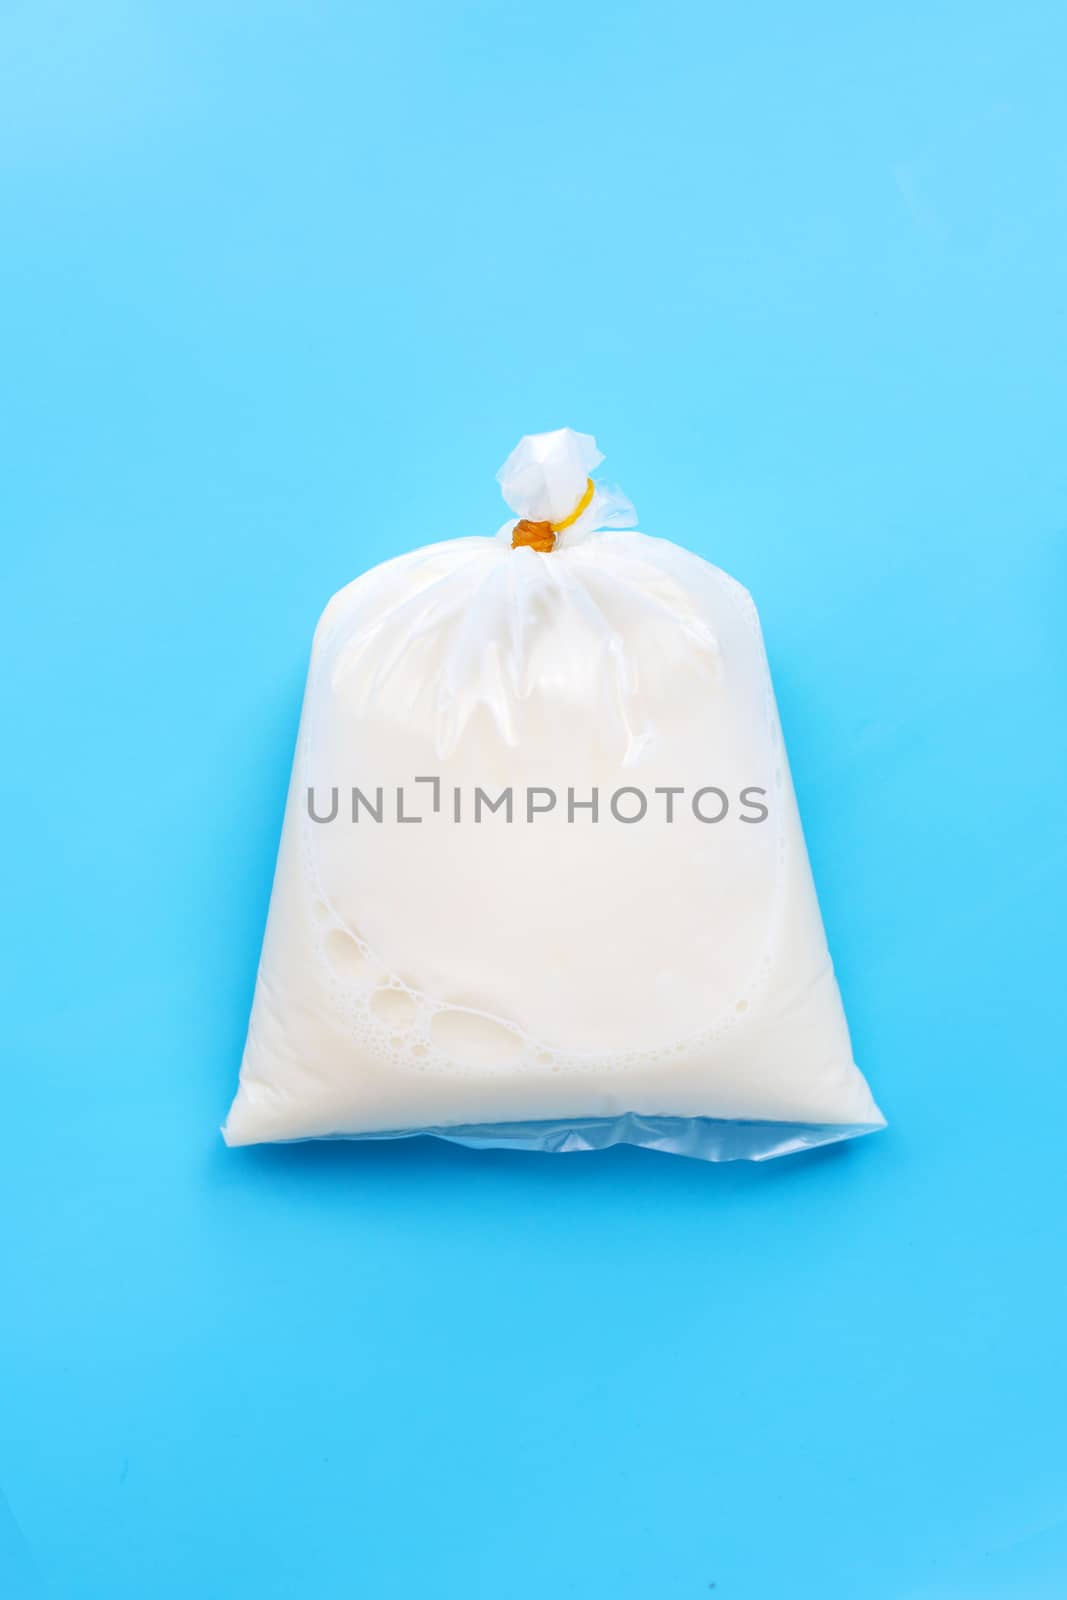 Soymilk in plastic bag on blue background. Top view